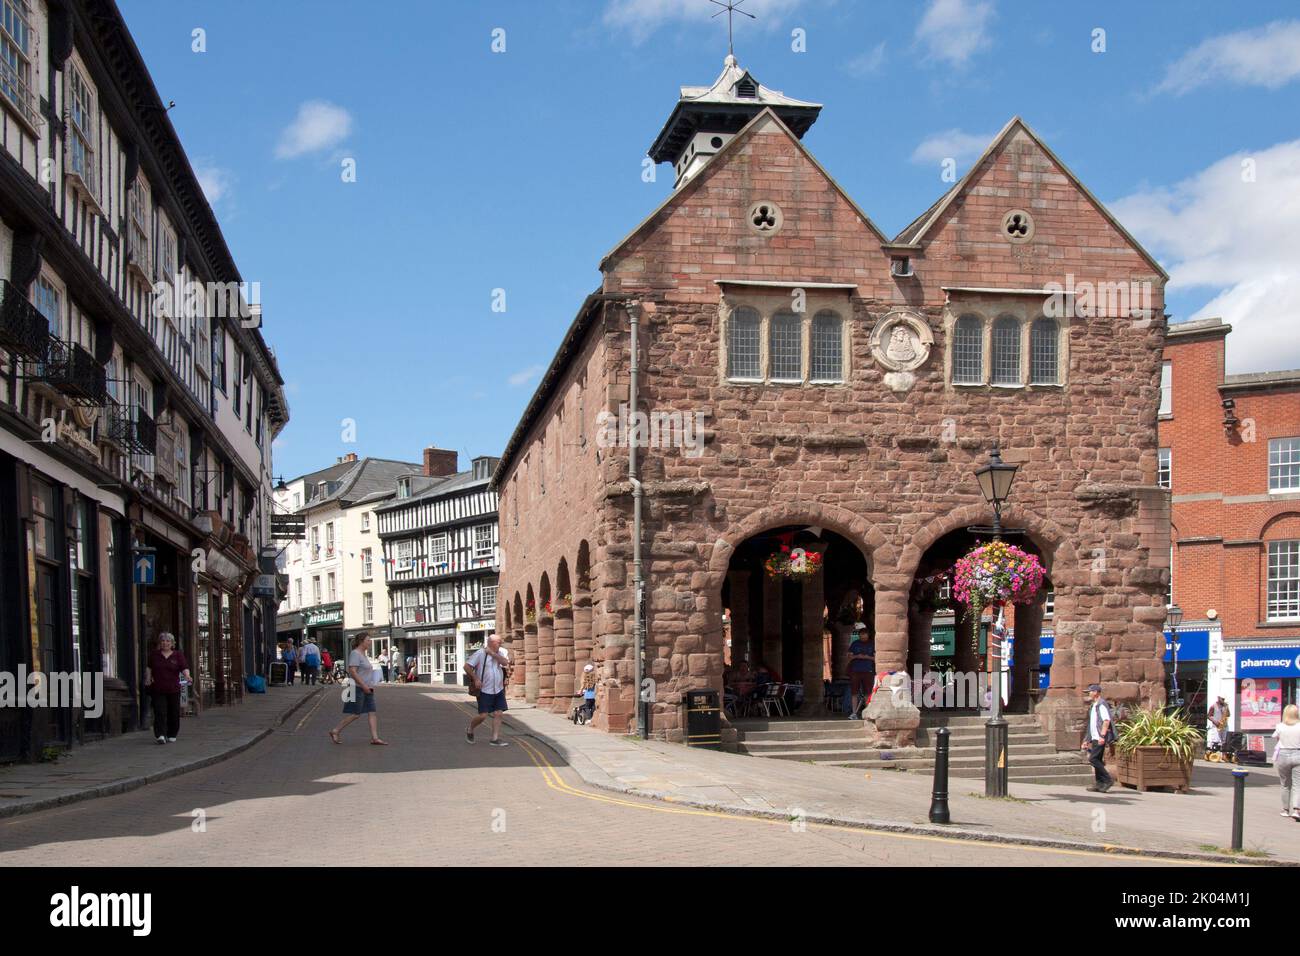 16th Century Market House & Heritage Center, Ross on Wye, Forest of Dean, Herefordshire, Angleterre Banque D'Images